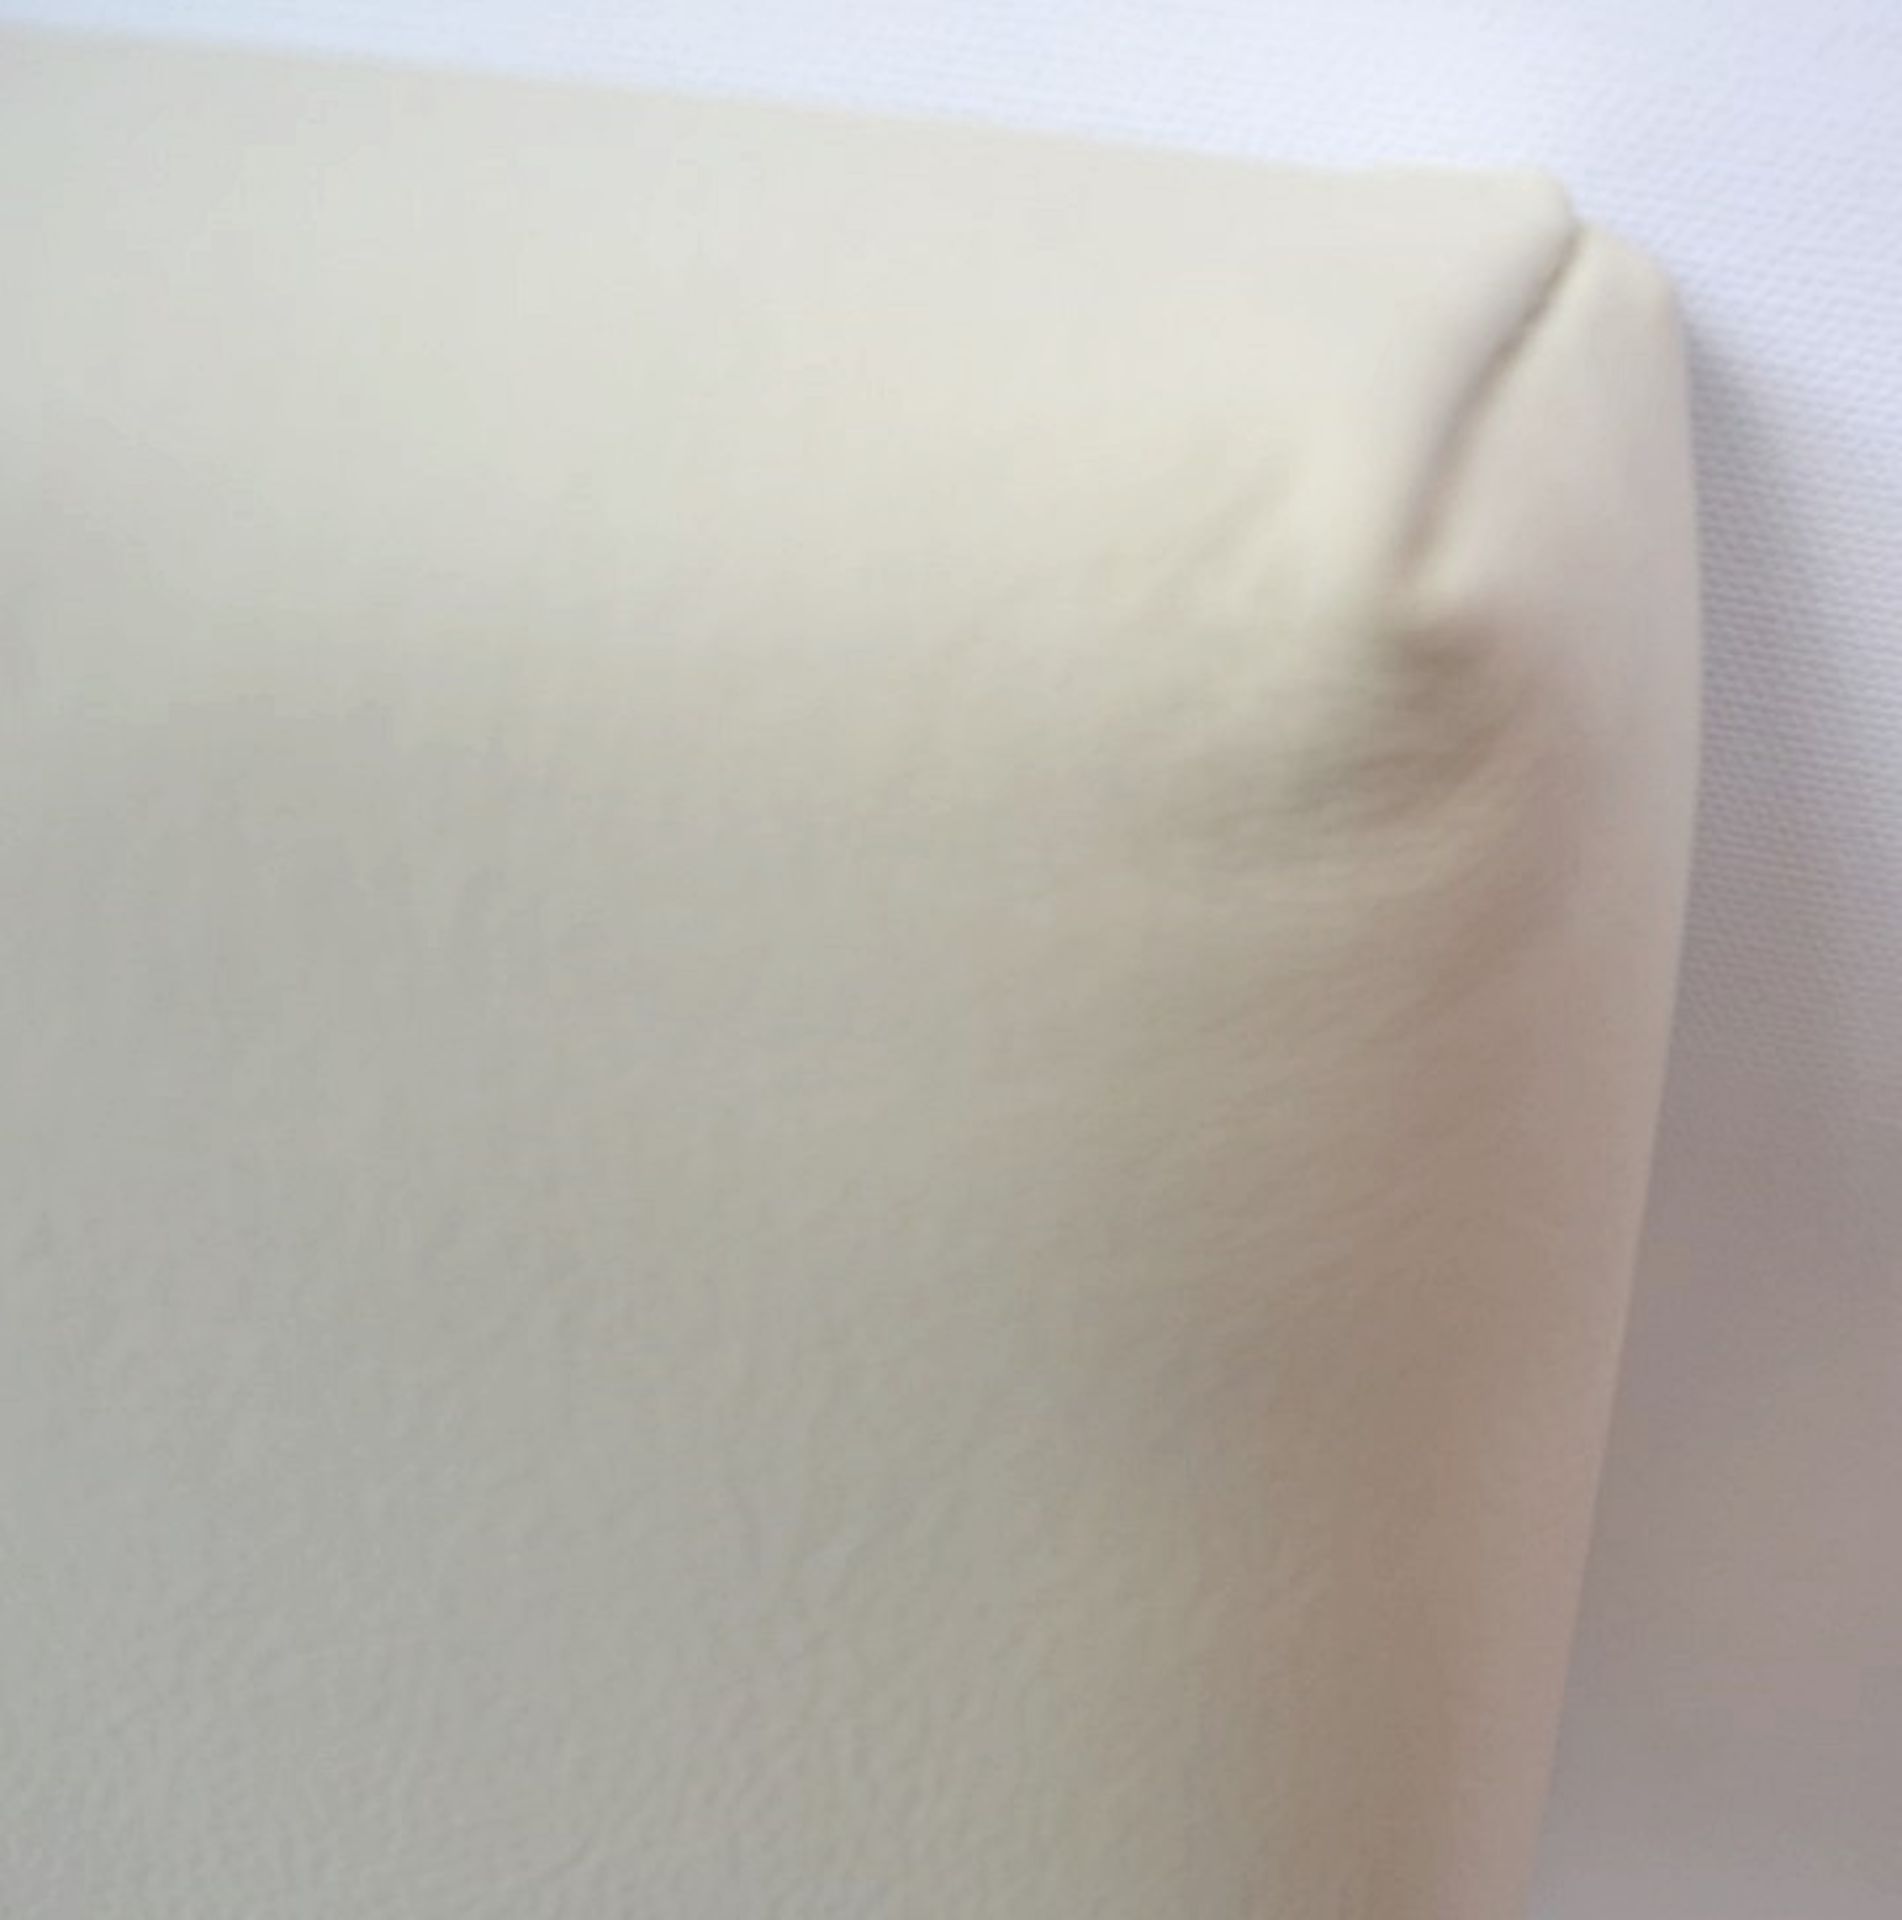 1 x REFLEX Seat Back, Upholstered In Cream Leather - Dimensions: 45.5 x 44.5 x 5cm - Ref: - Image 4 of 5